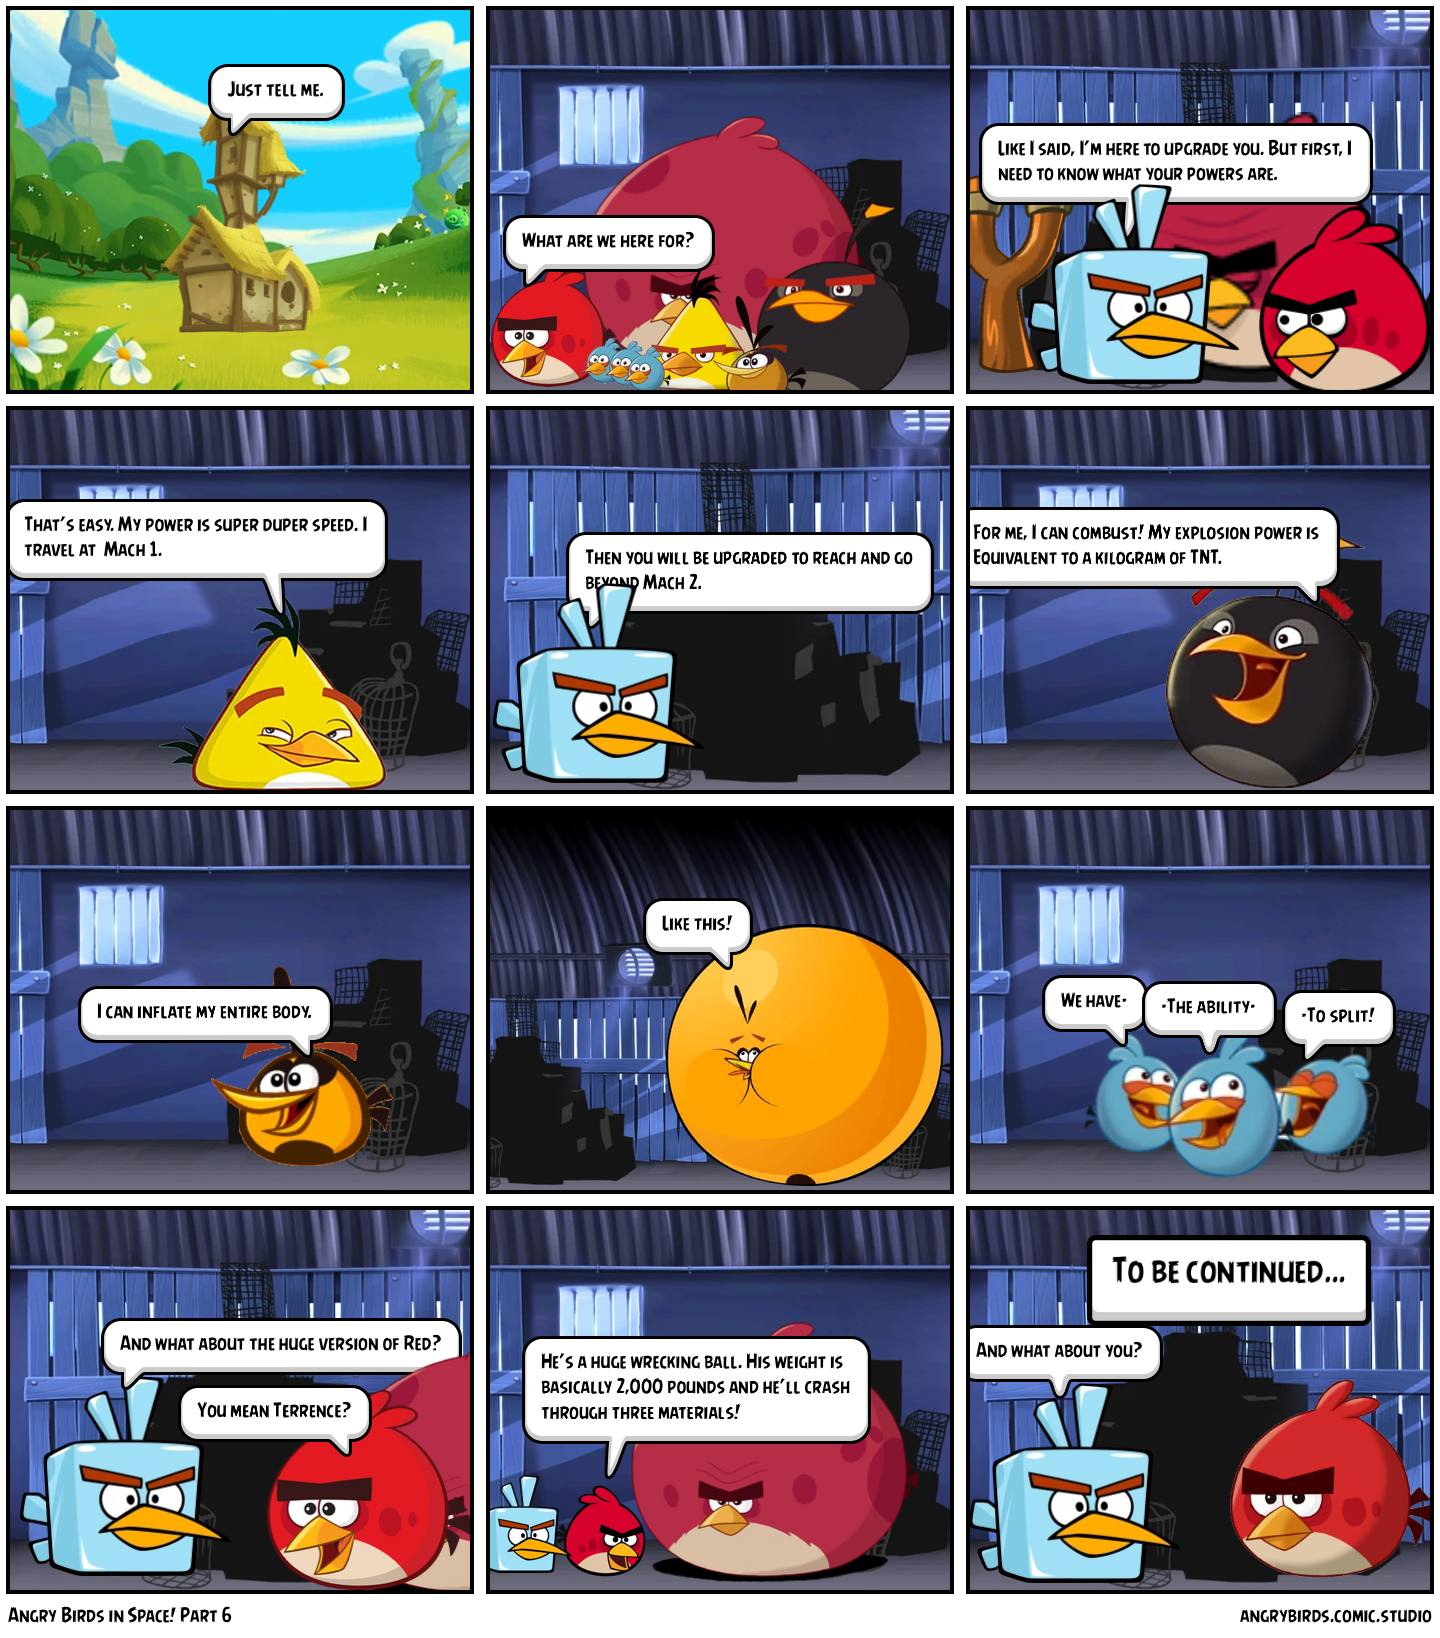 Bubbles (Angry Birds)